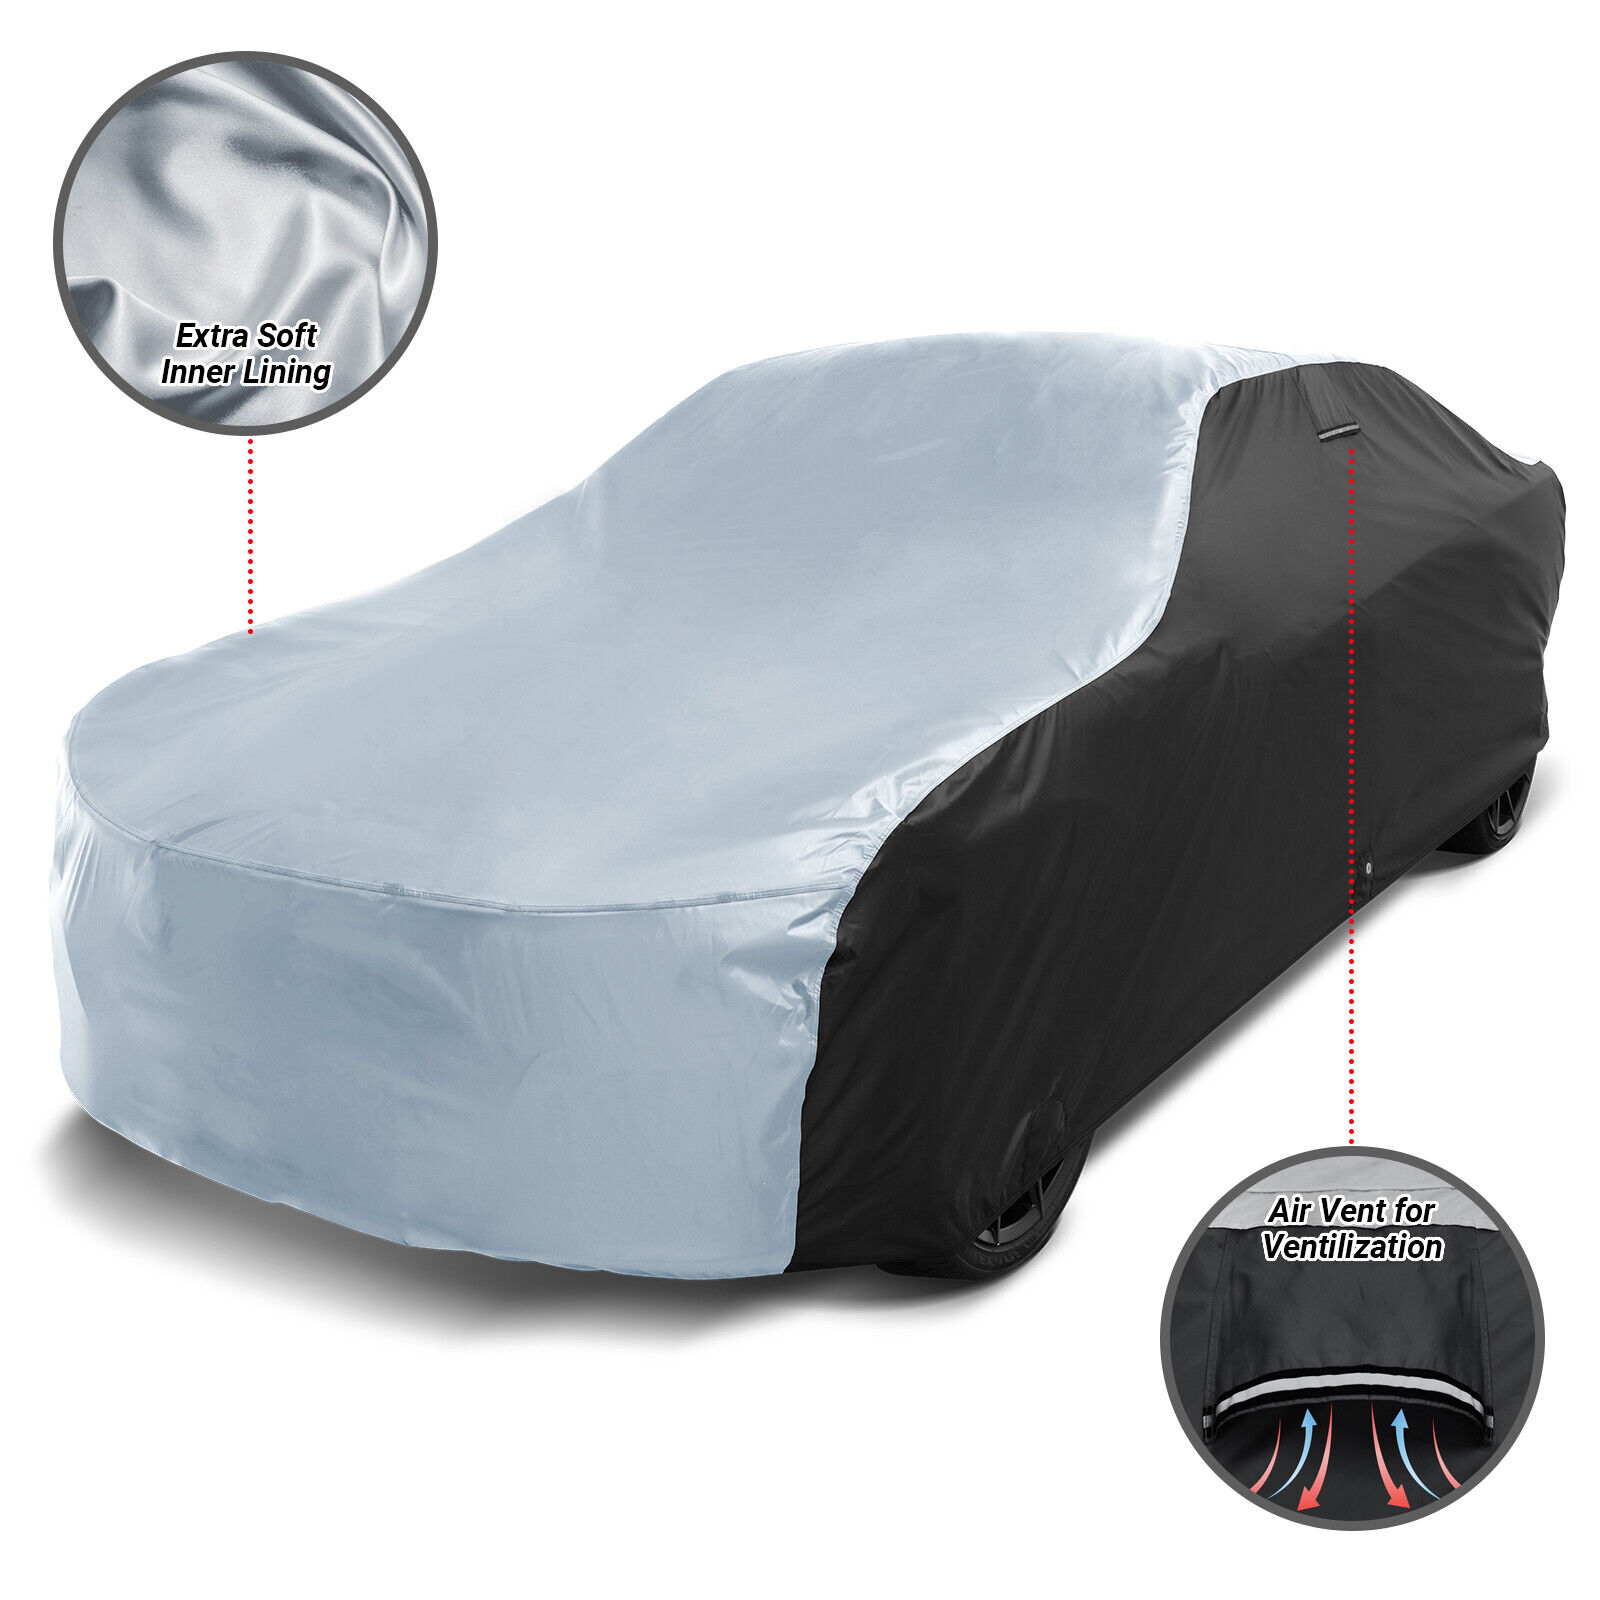 For FERRARI [ENZO] Custom-Fit Outdoor Waterproof All Weather Best Car Cover